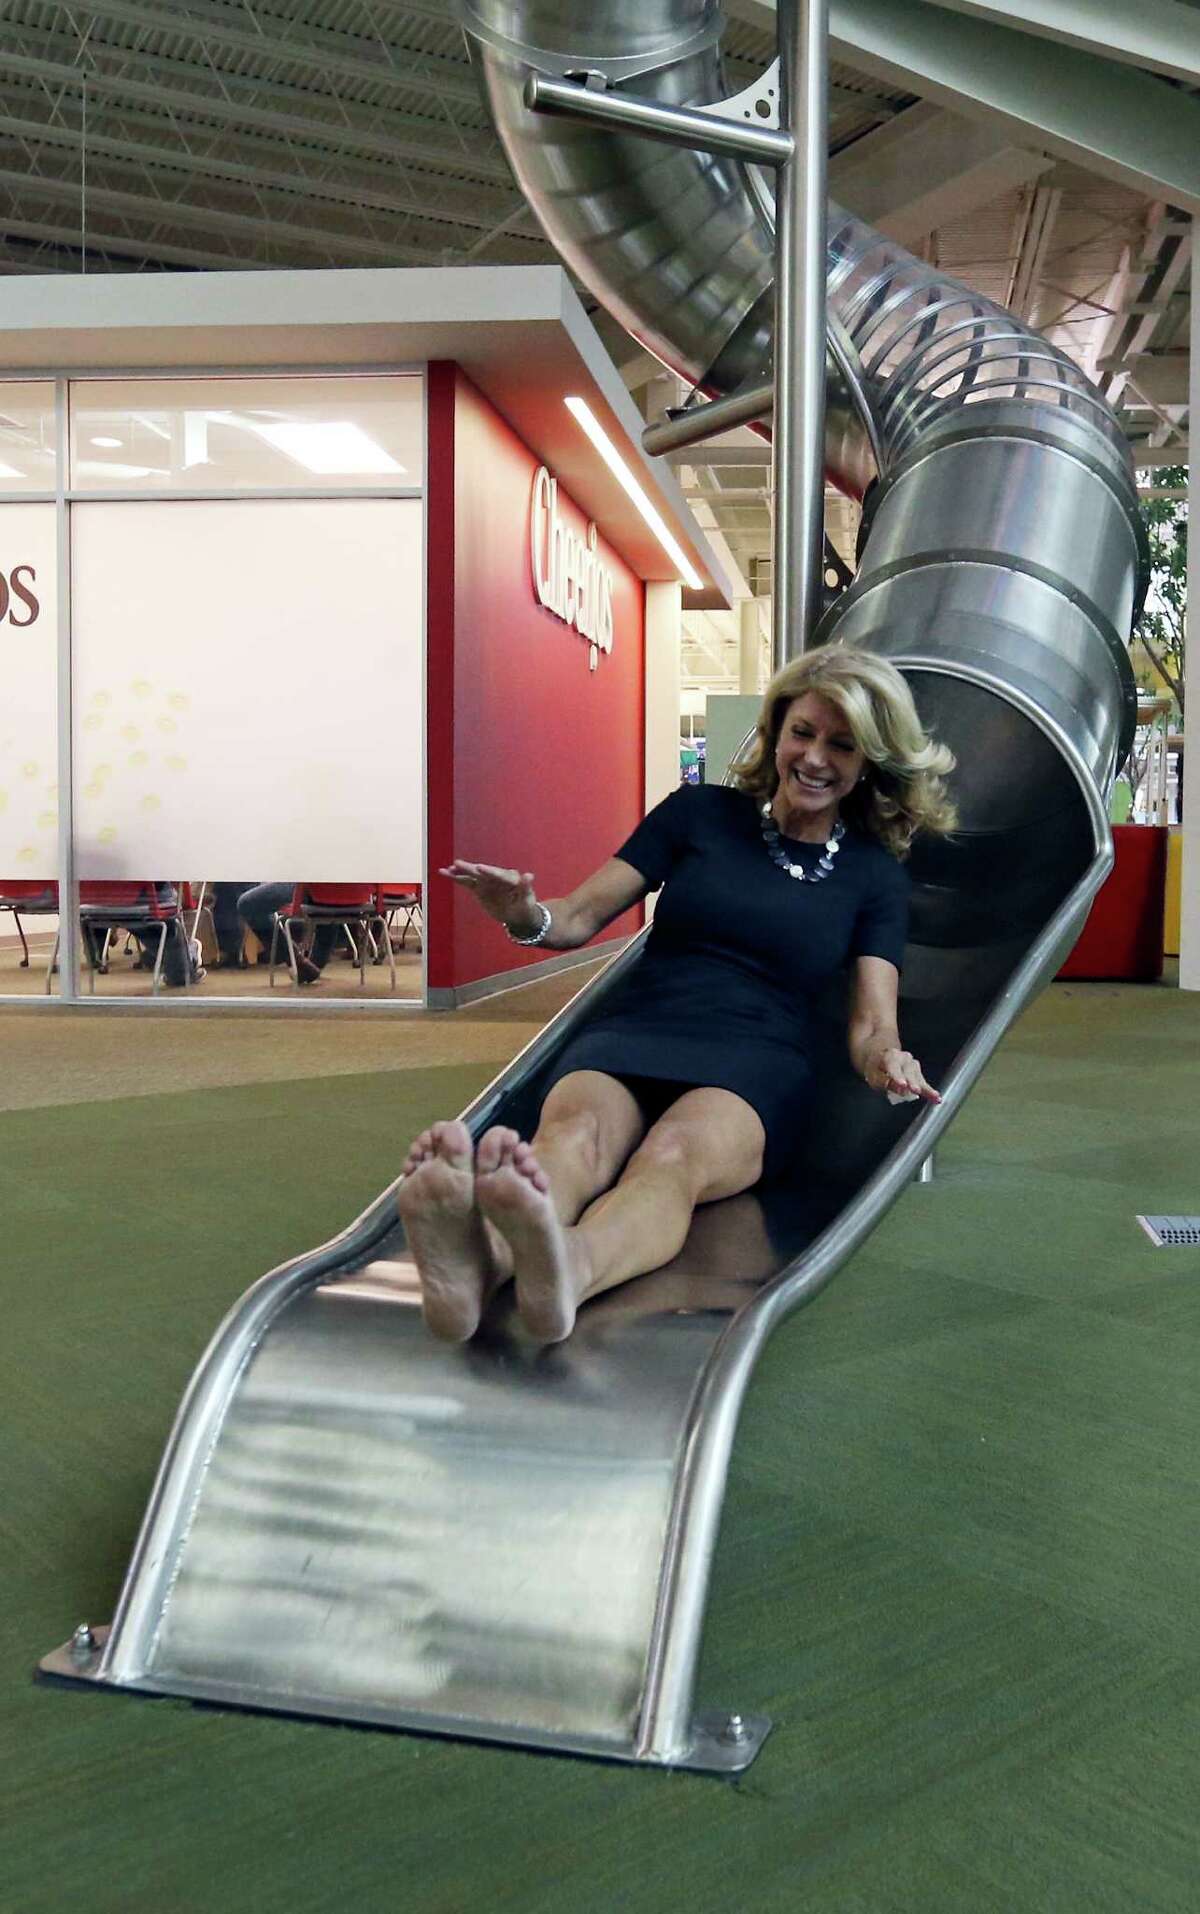 State Senator Wendy Davis, who is running for Texas Governor, takes the slide on a tour of Rackspace Hosting Inc. Monday Oct. 7, 2013.